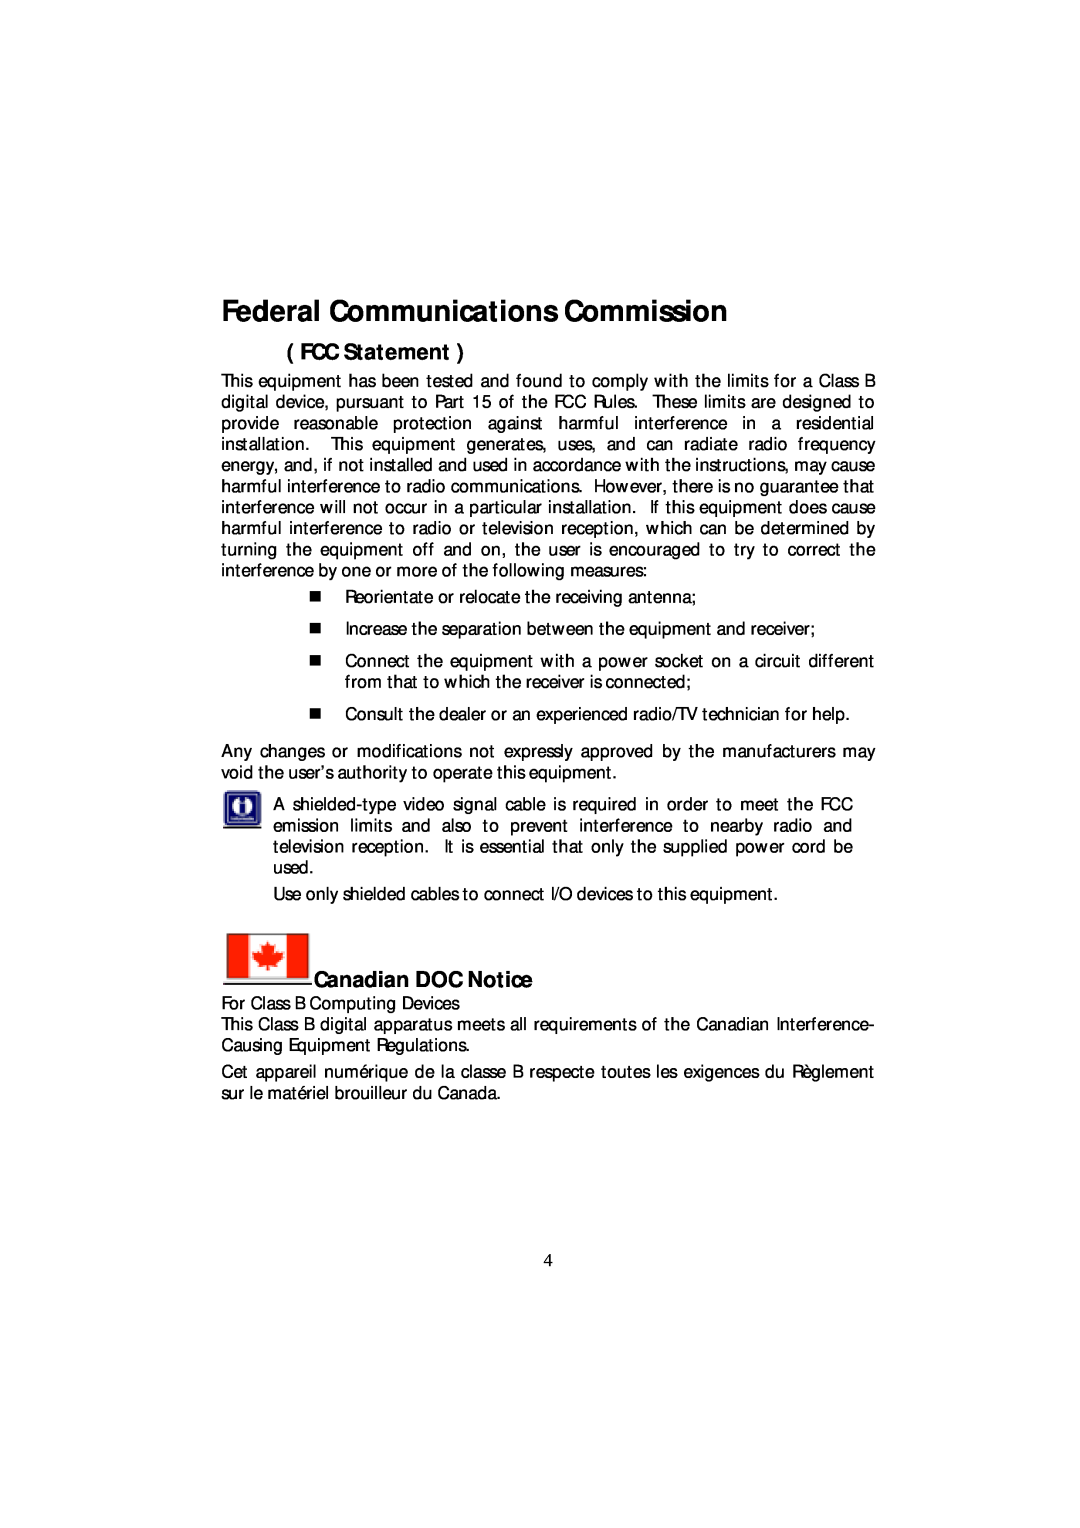 Acer CRT Monitor manual Federal Communications Commission, FCC Statement, Canadian DOC Notice 